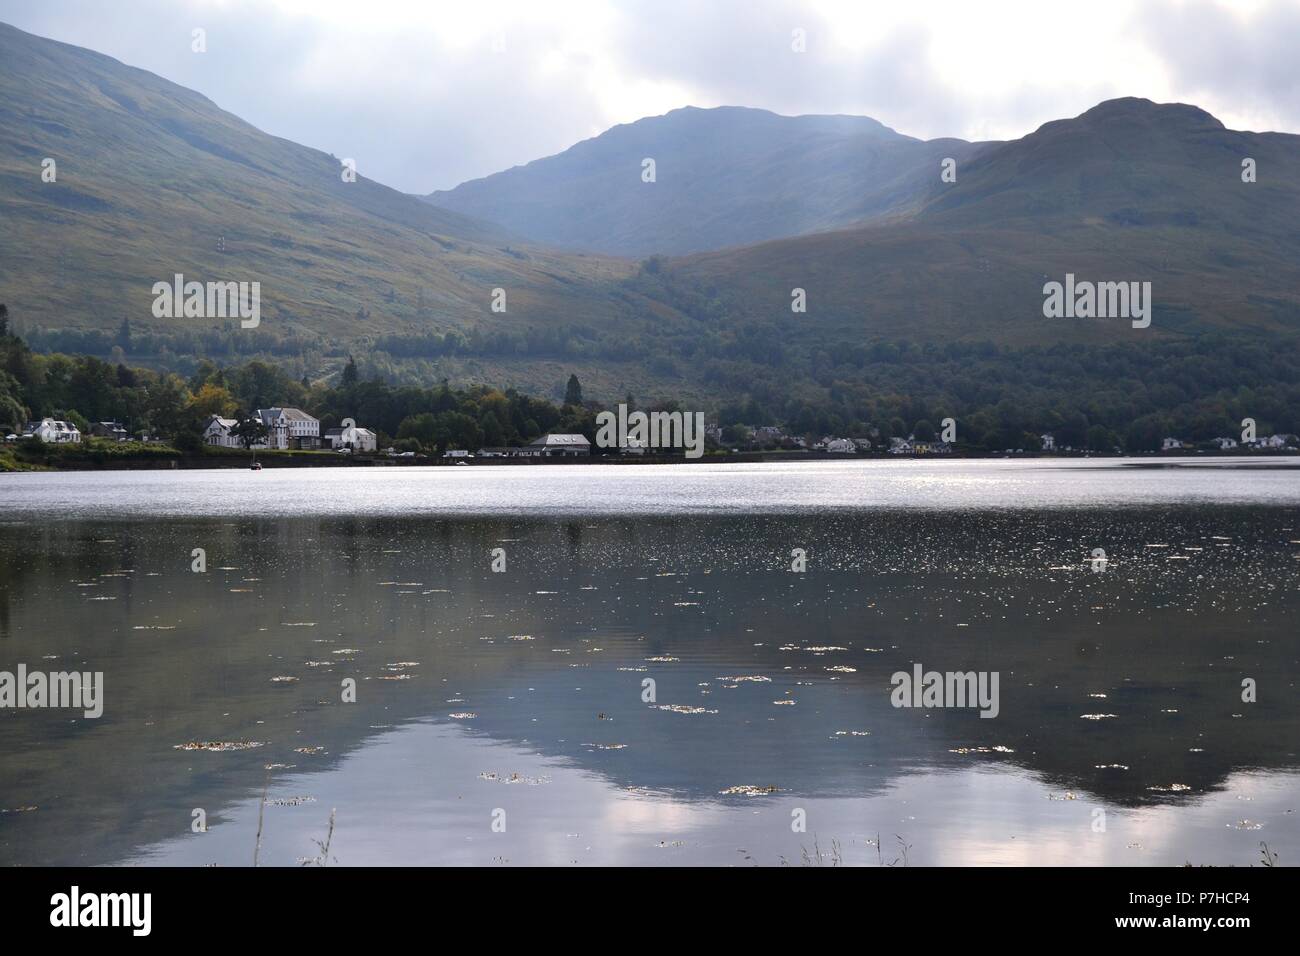 Loch Long lake surrounded by Cobber mountains in Scotland, Europe Stock Photo